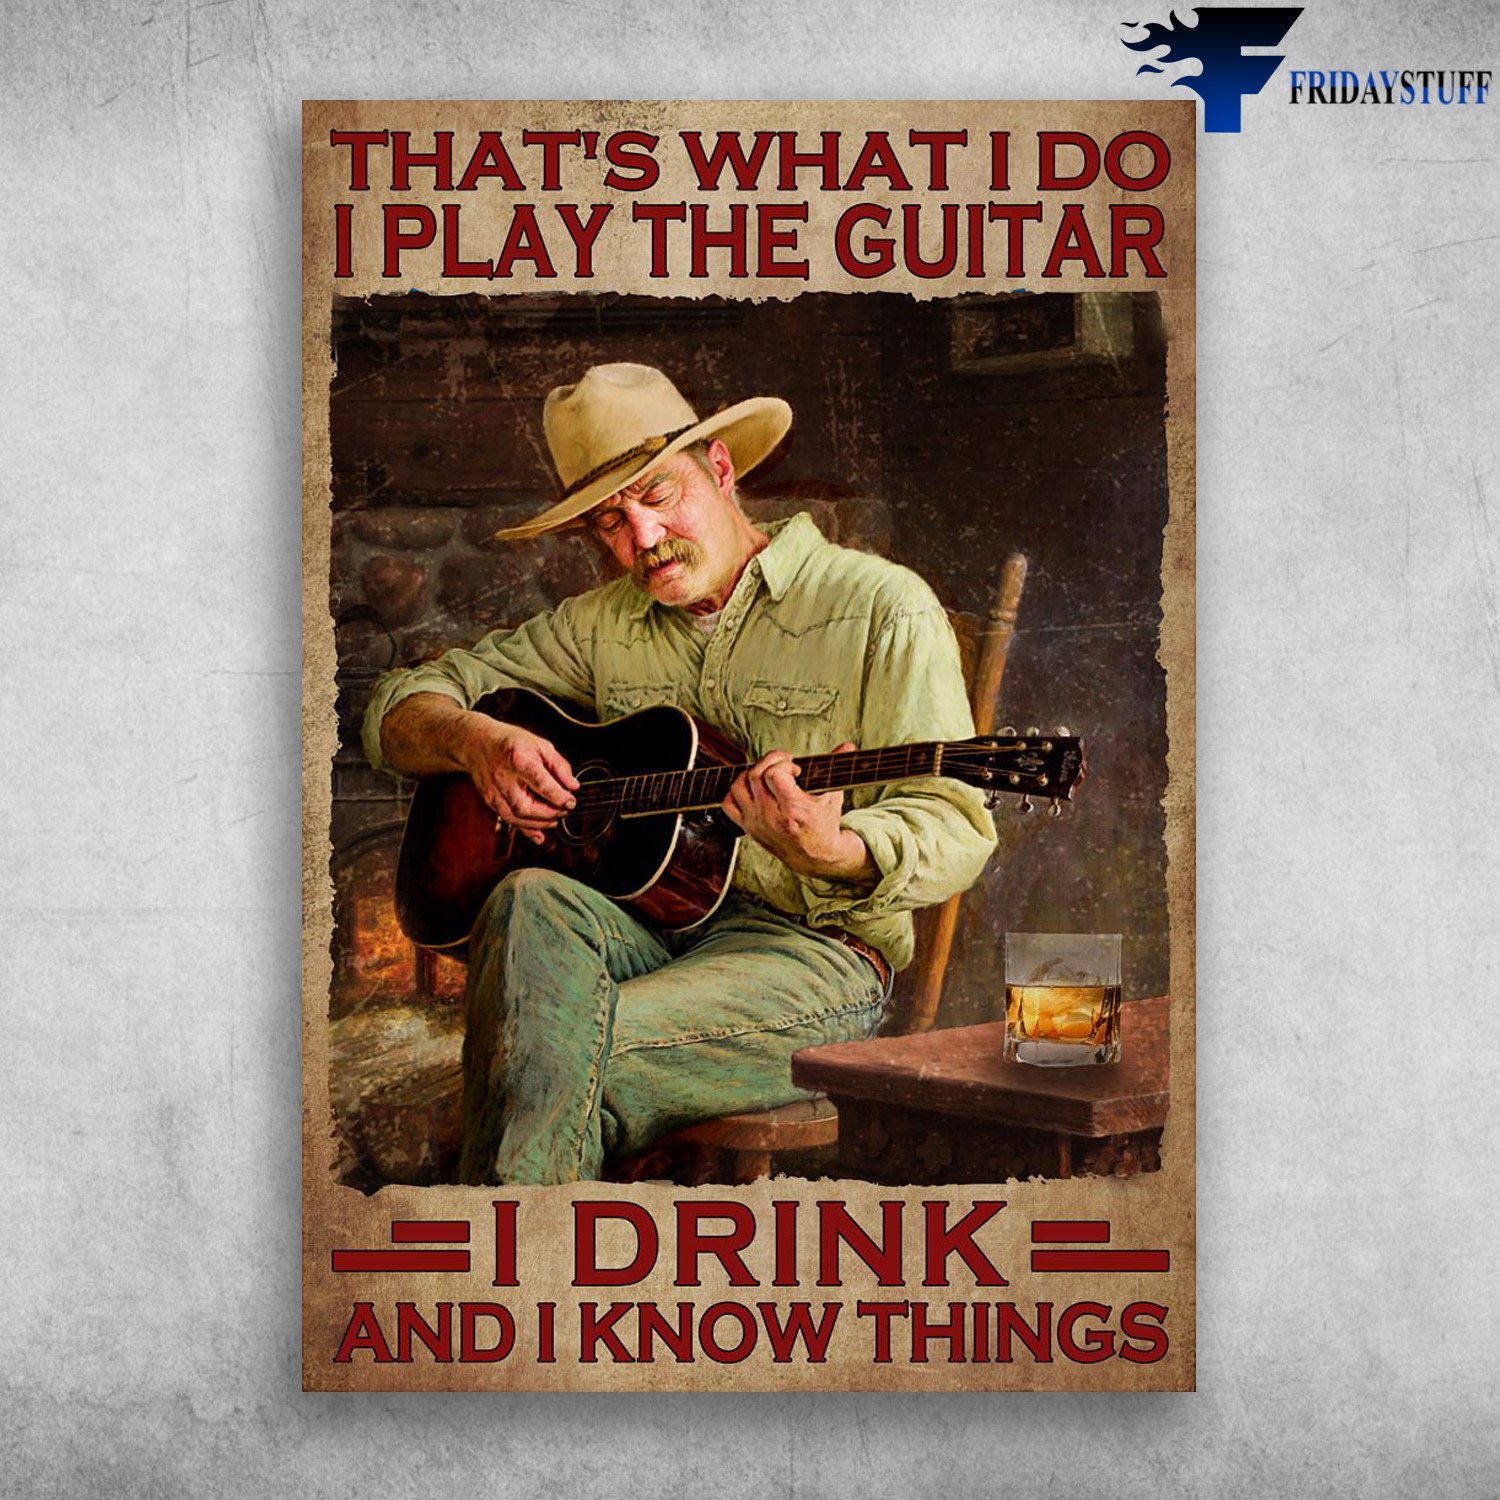 Man Playing Guitar, Guitar Lover, Guitar Man - That's What I Do, I Play The Guitar, I Drink, And I Know Things